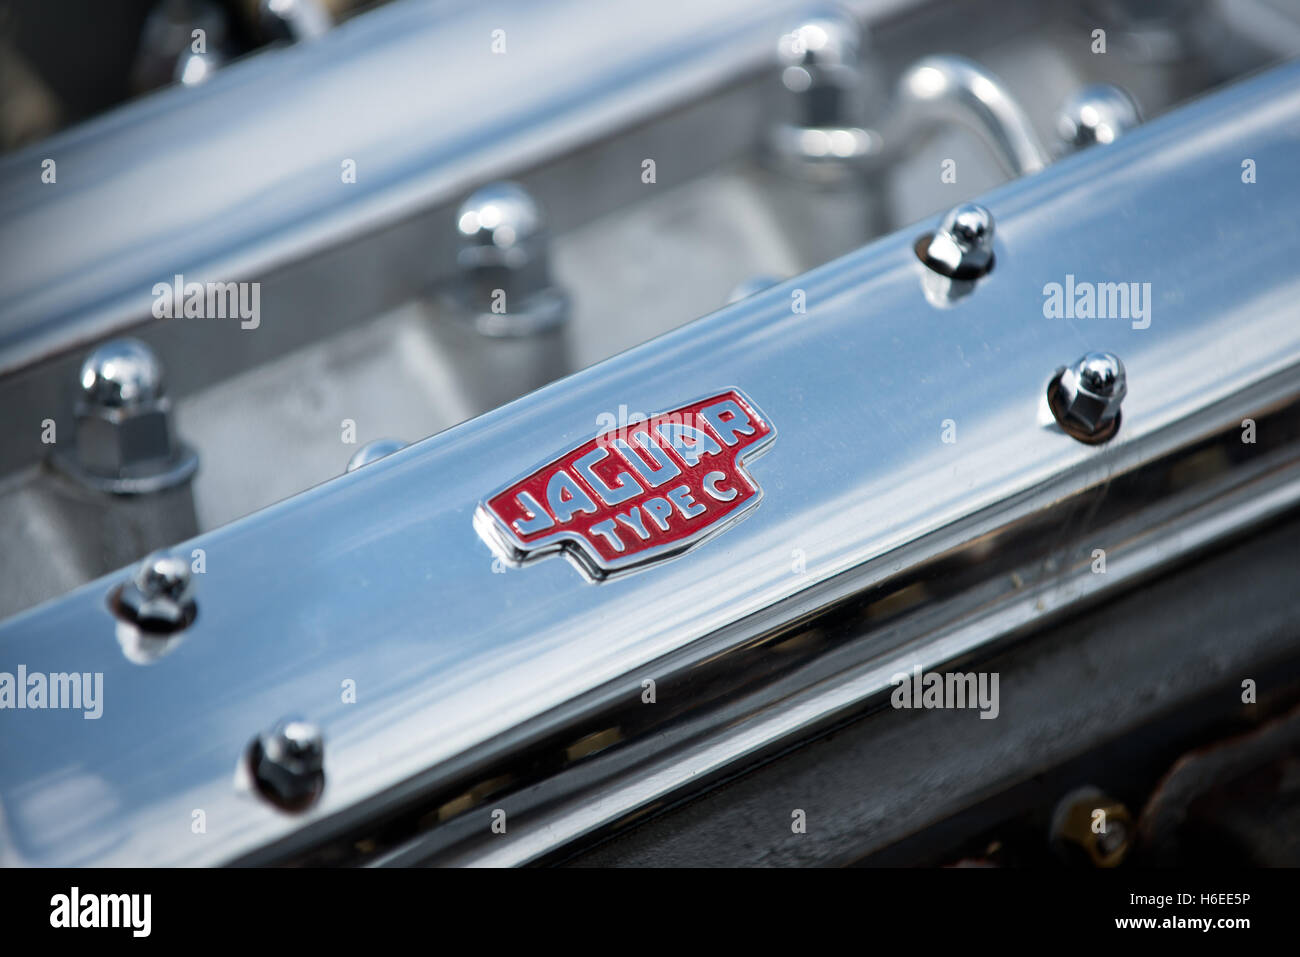 The alloy rocker cover of the iconic British C-Type Jaguar sports car Stock Photo